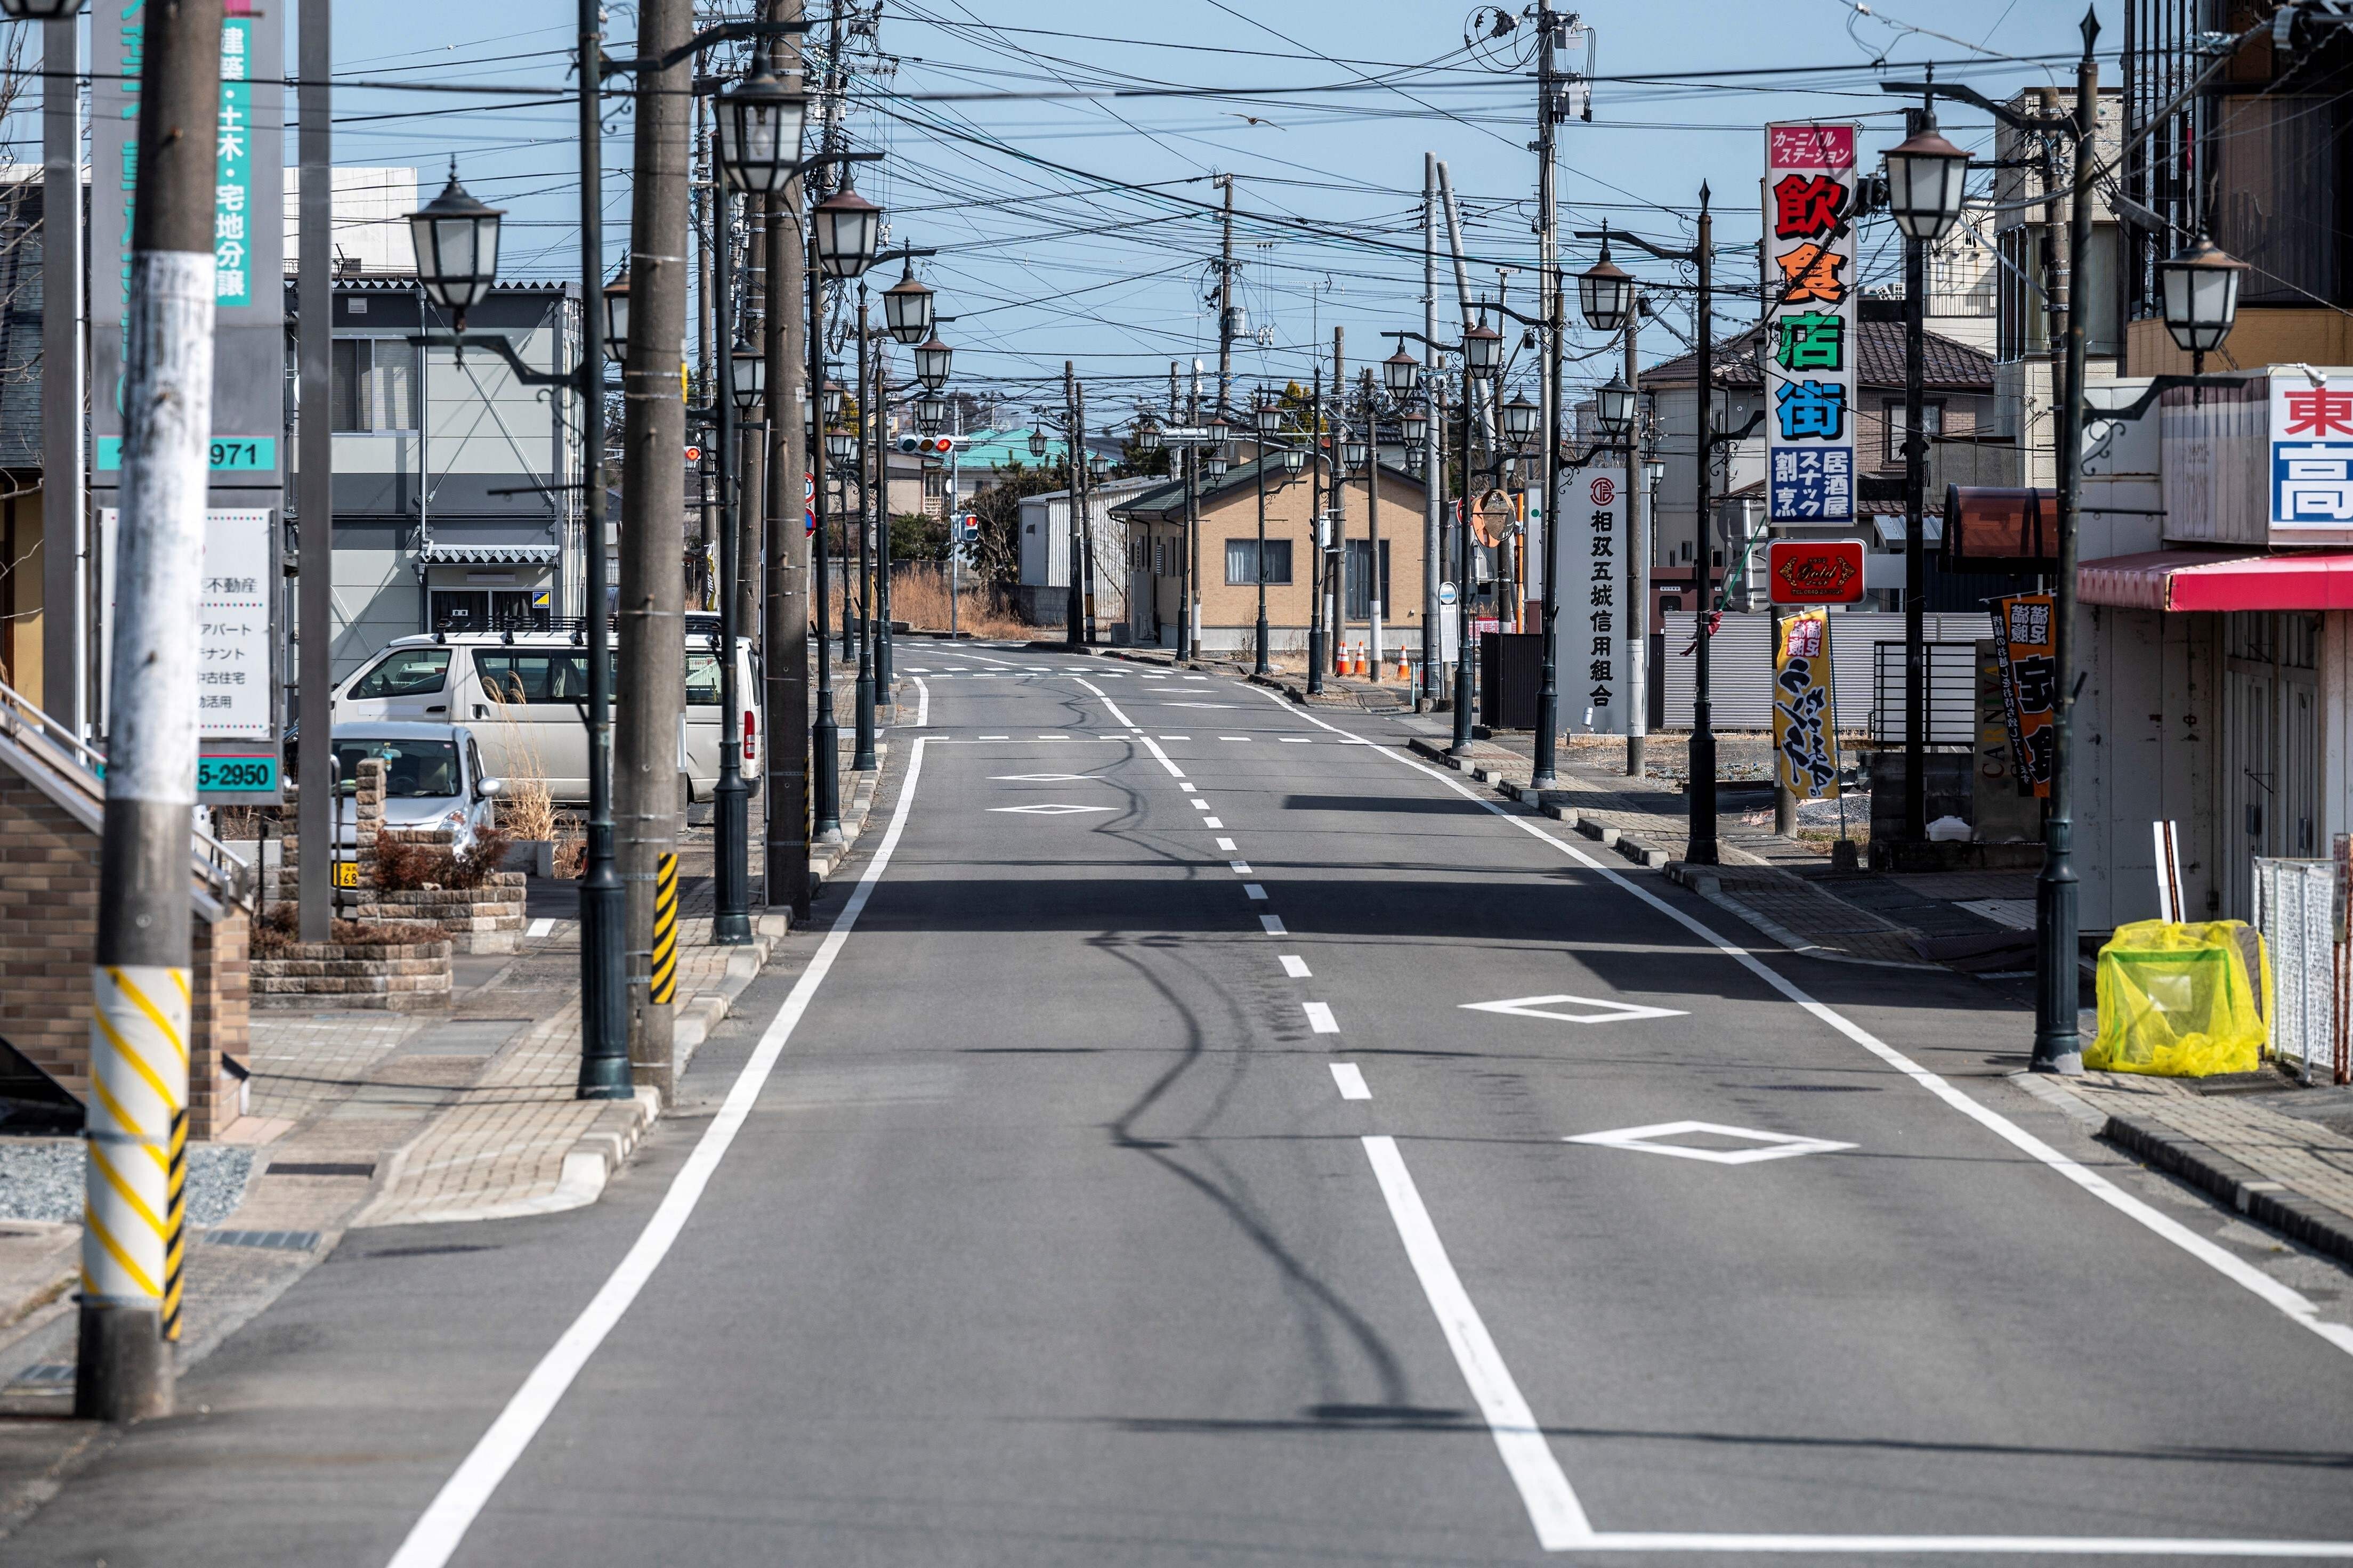 Parts of Namie still resemble a ghost town, 10 years after the Fukushima Daiichi nuclear plant catastrophe. Photo: AFP